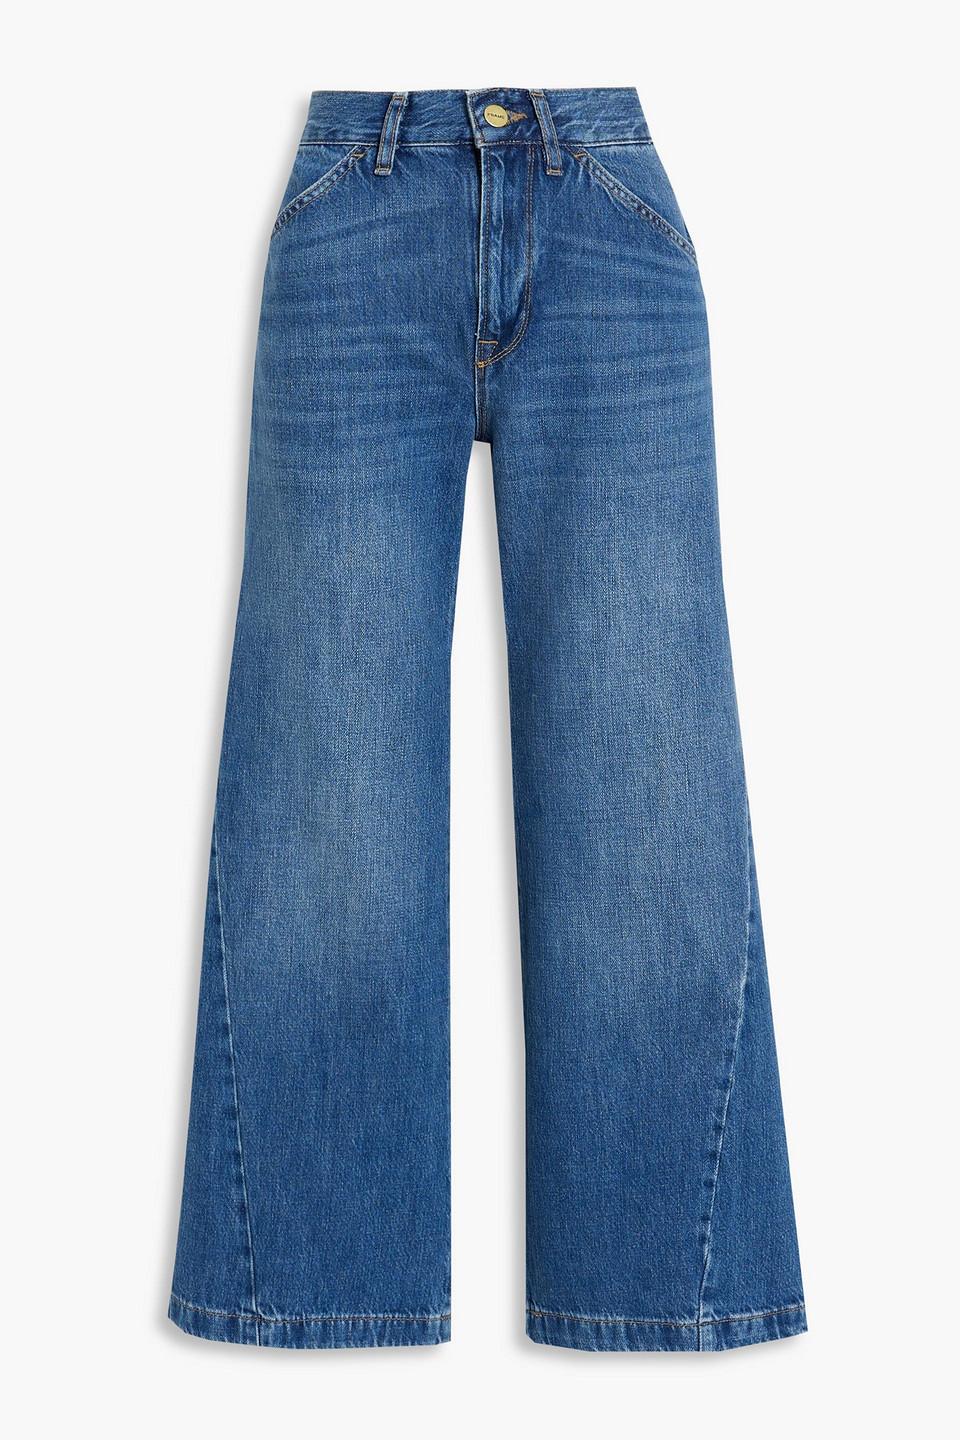 FRAME Le Pixie Palazzo High-rise Wide-leg Jeans in Blue | Lyst